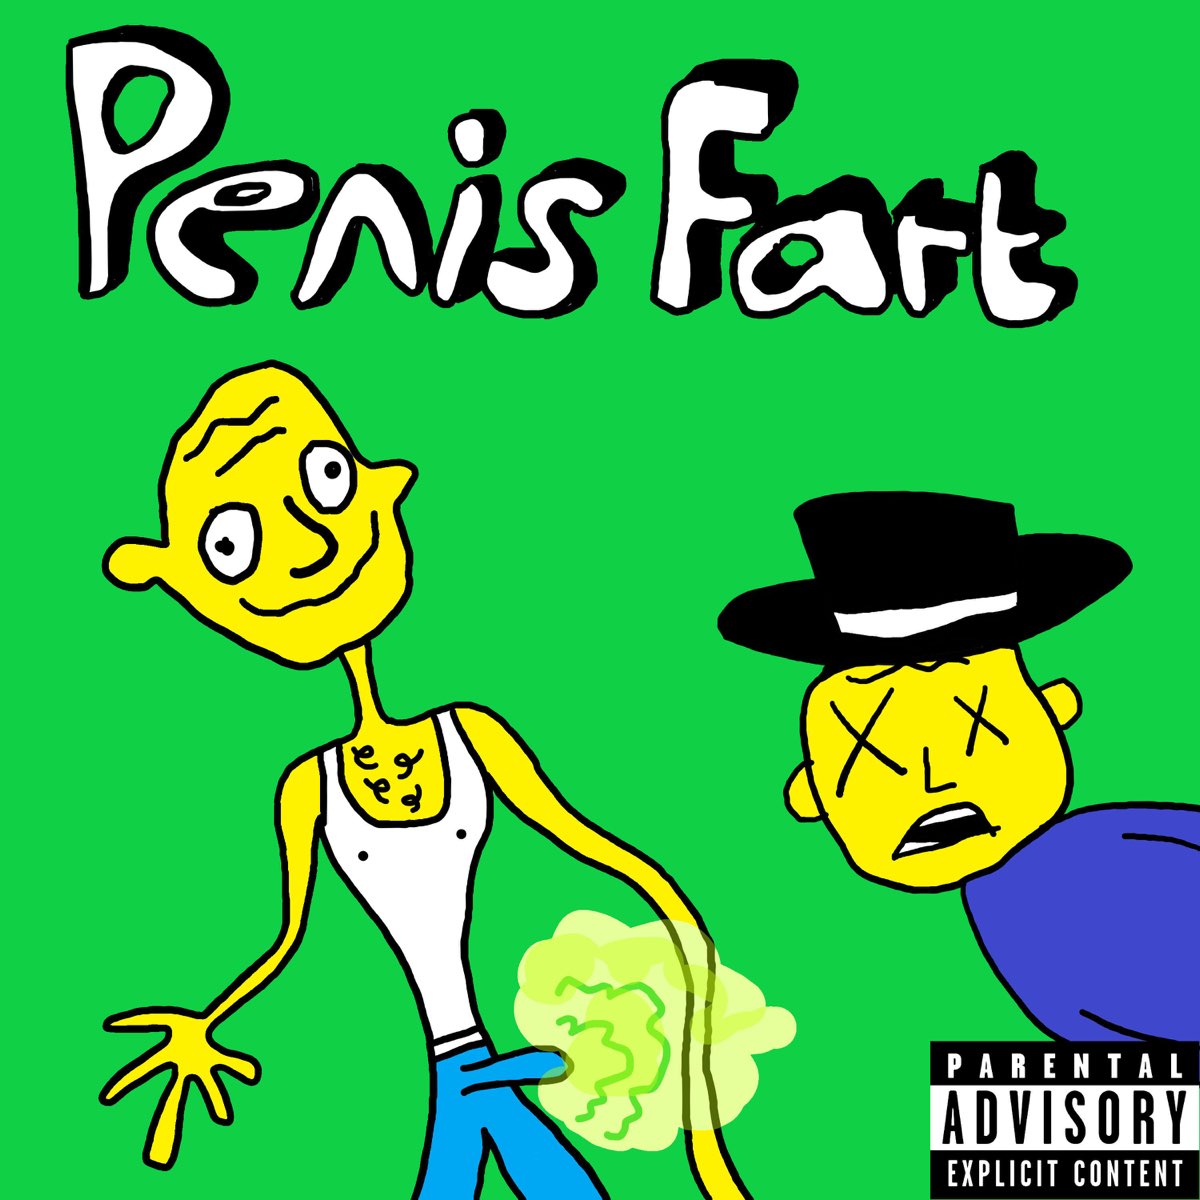 barbara collet recommends Can A Penis Fart